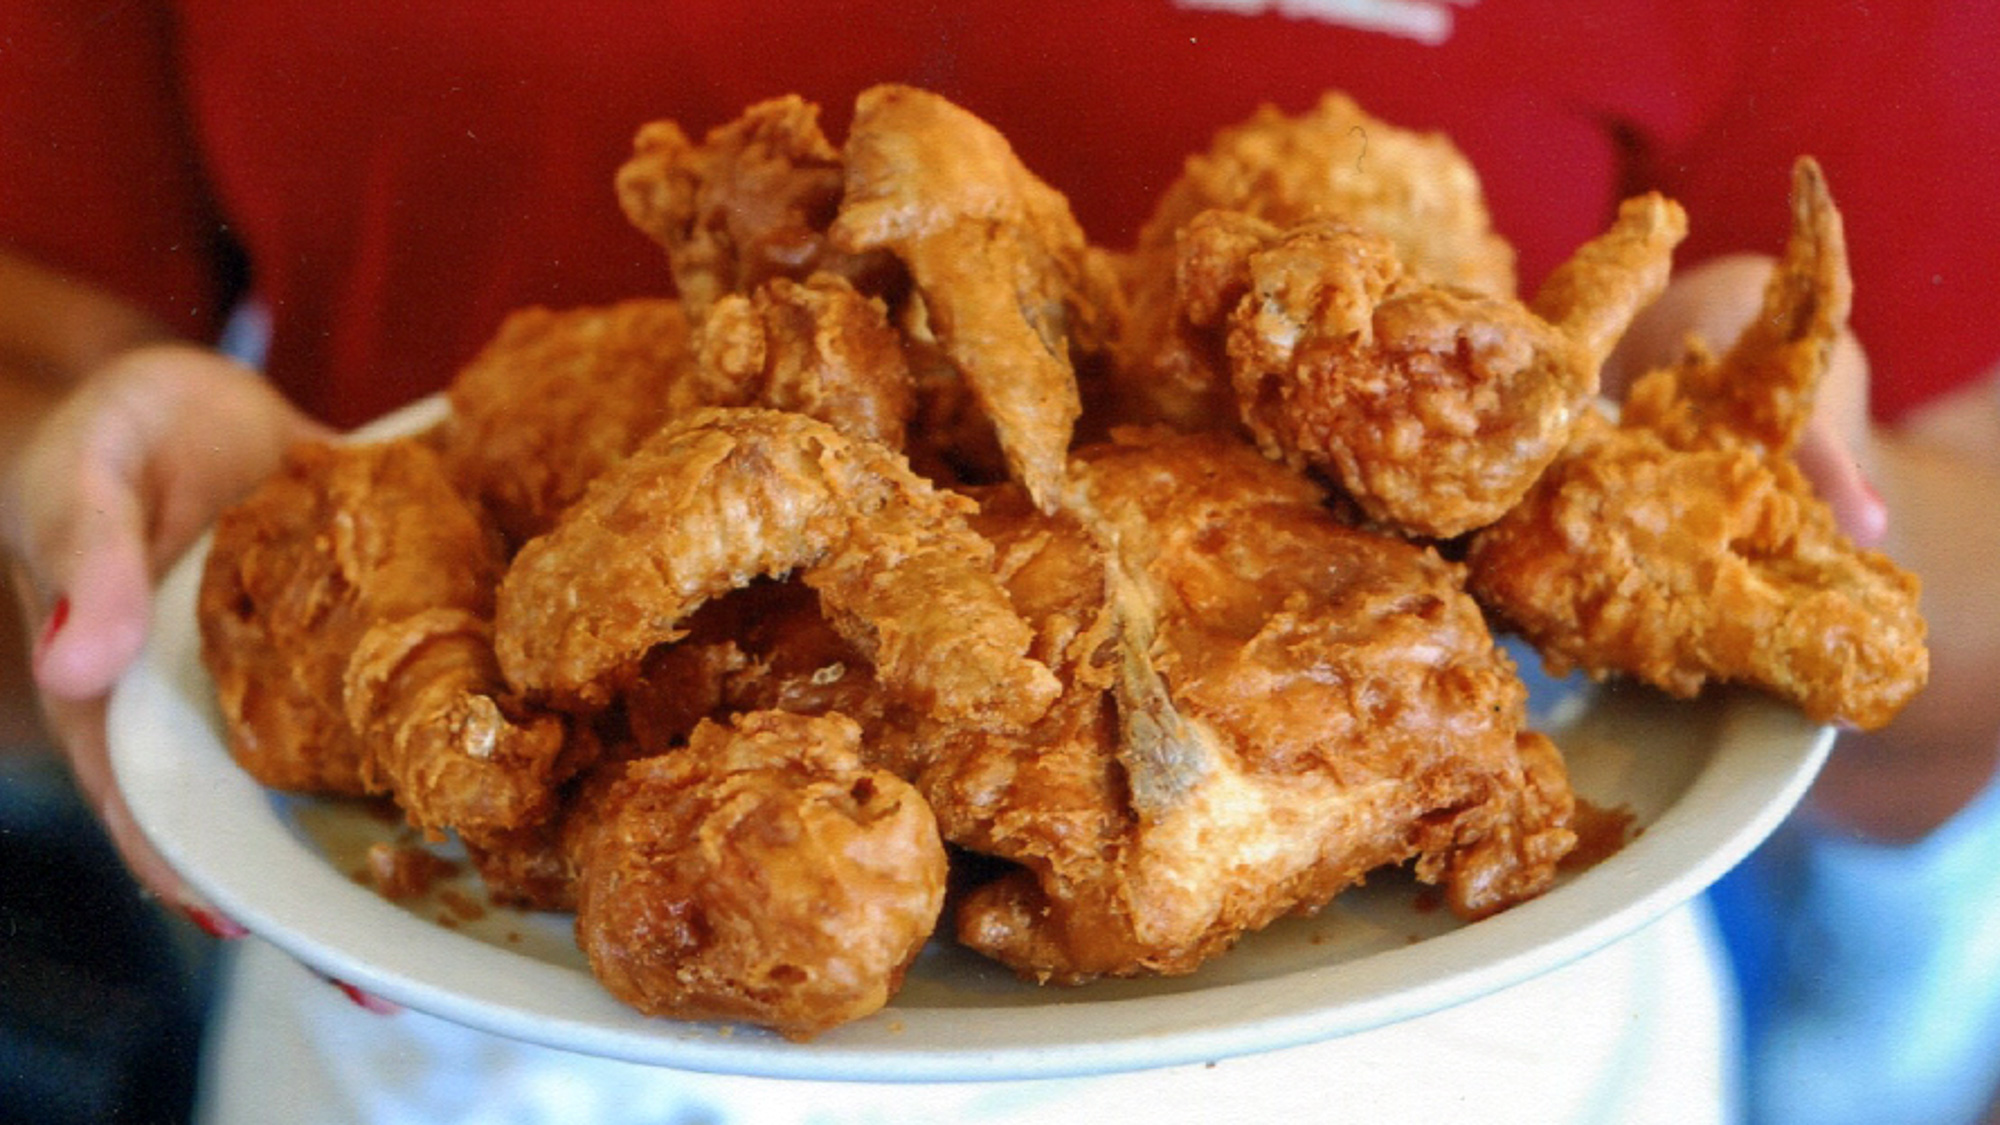 Fried Chicken in New Orleans